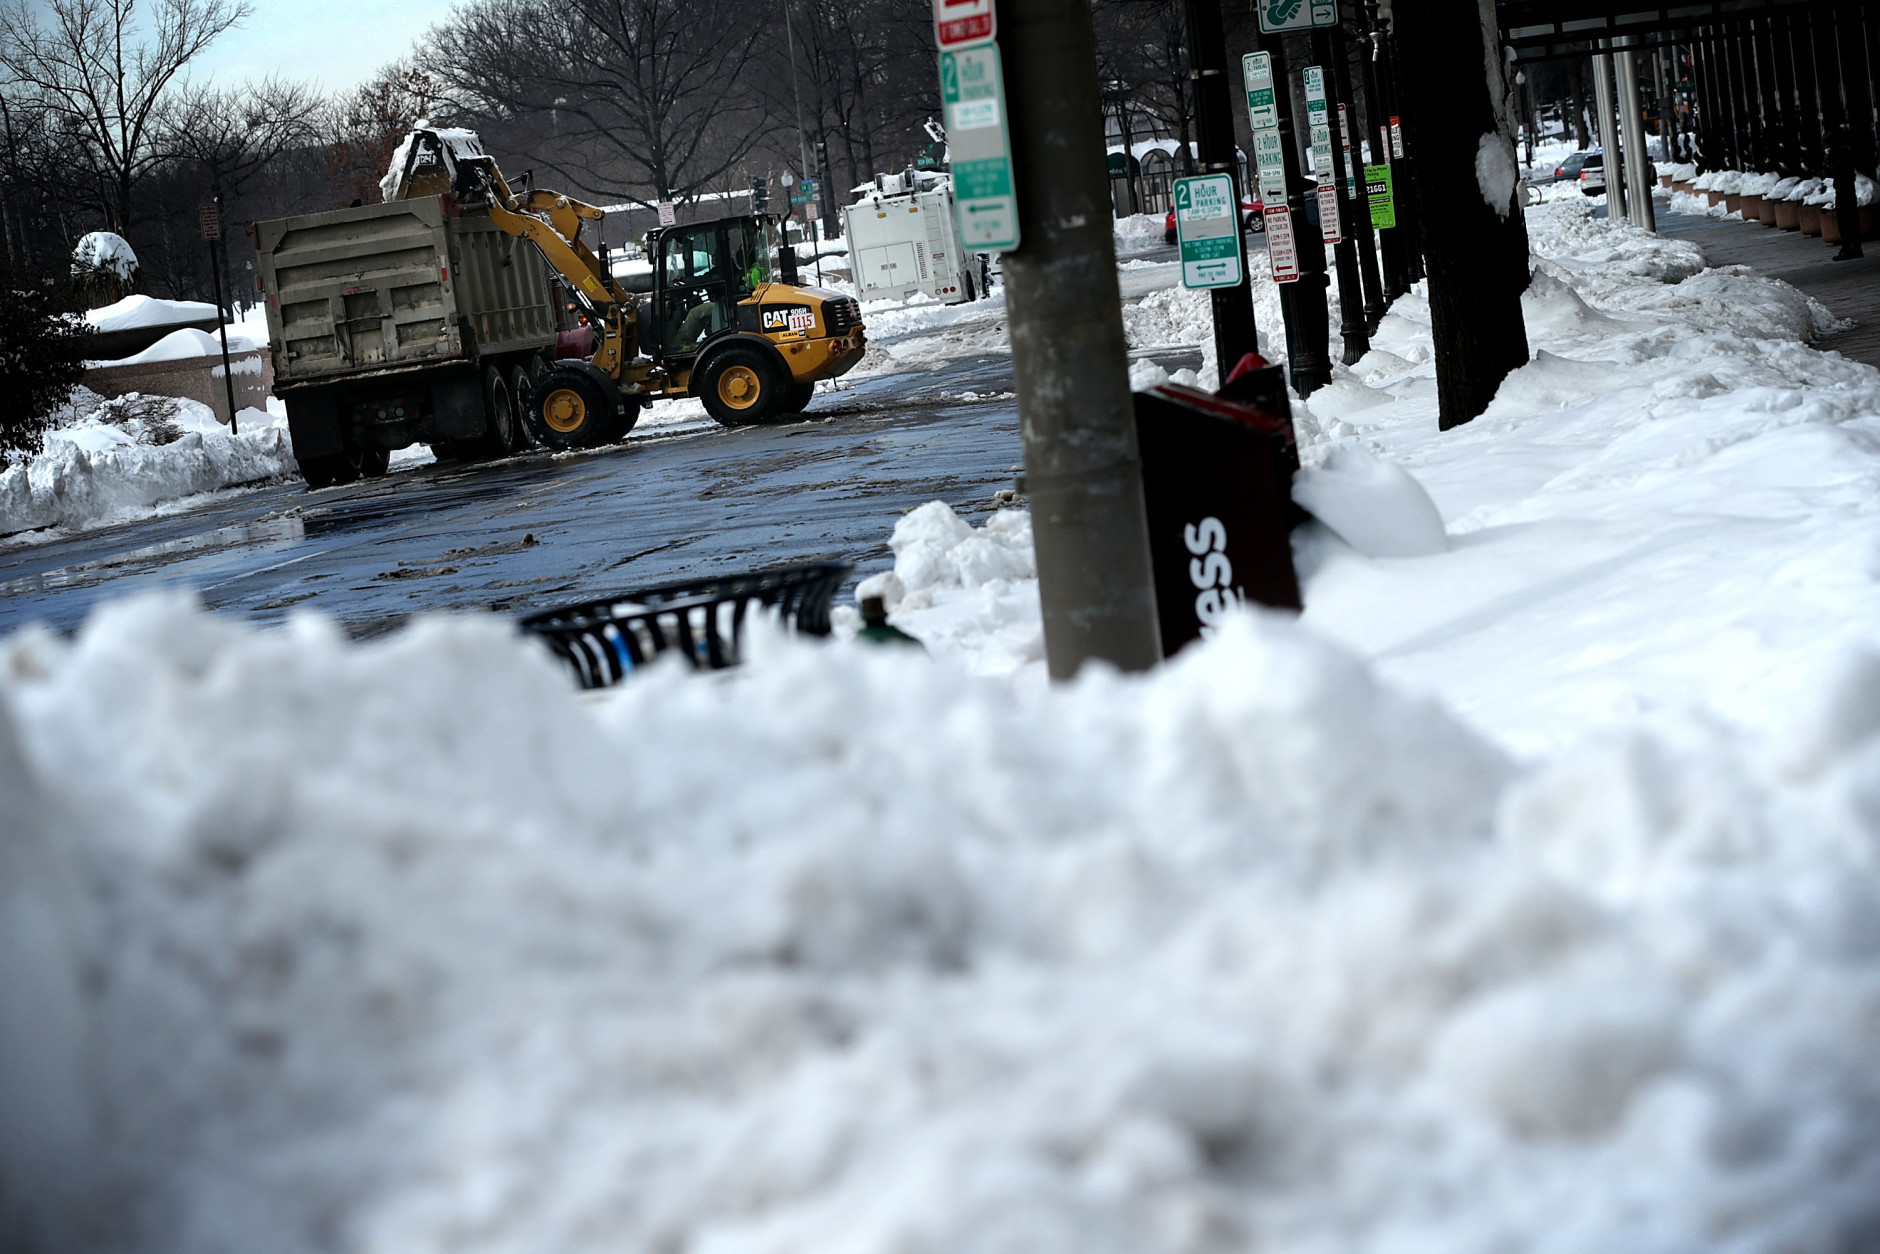 A front end loader unloads snow onto a truck on E street, NW, January 25, 2016 in Washington, DC.  Winter Storm Jonas hit the East Coast over the weekend, breaking snowfall records, causing 29 storm-related deaths, leaving thousands of homes without power and serious flooding in coastal areas.   (Photo by Alex Wong/Getty Images)